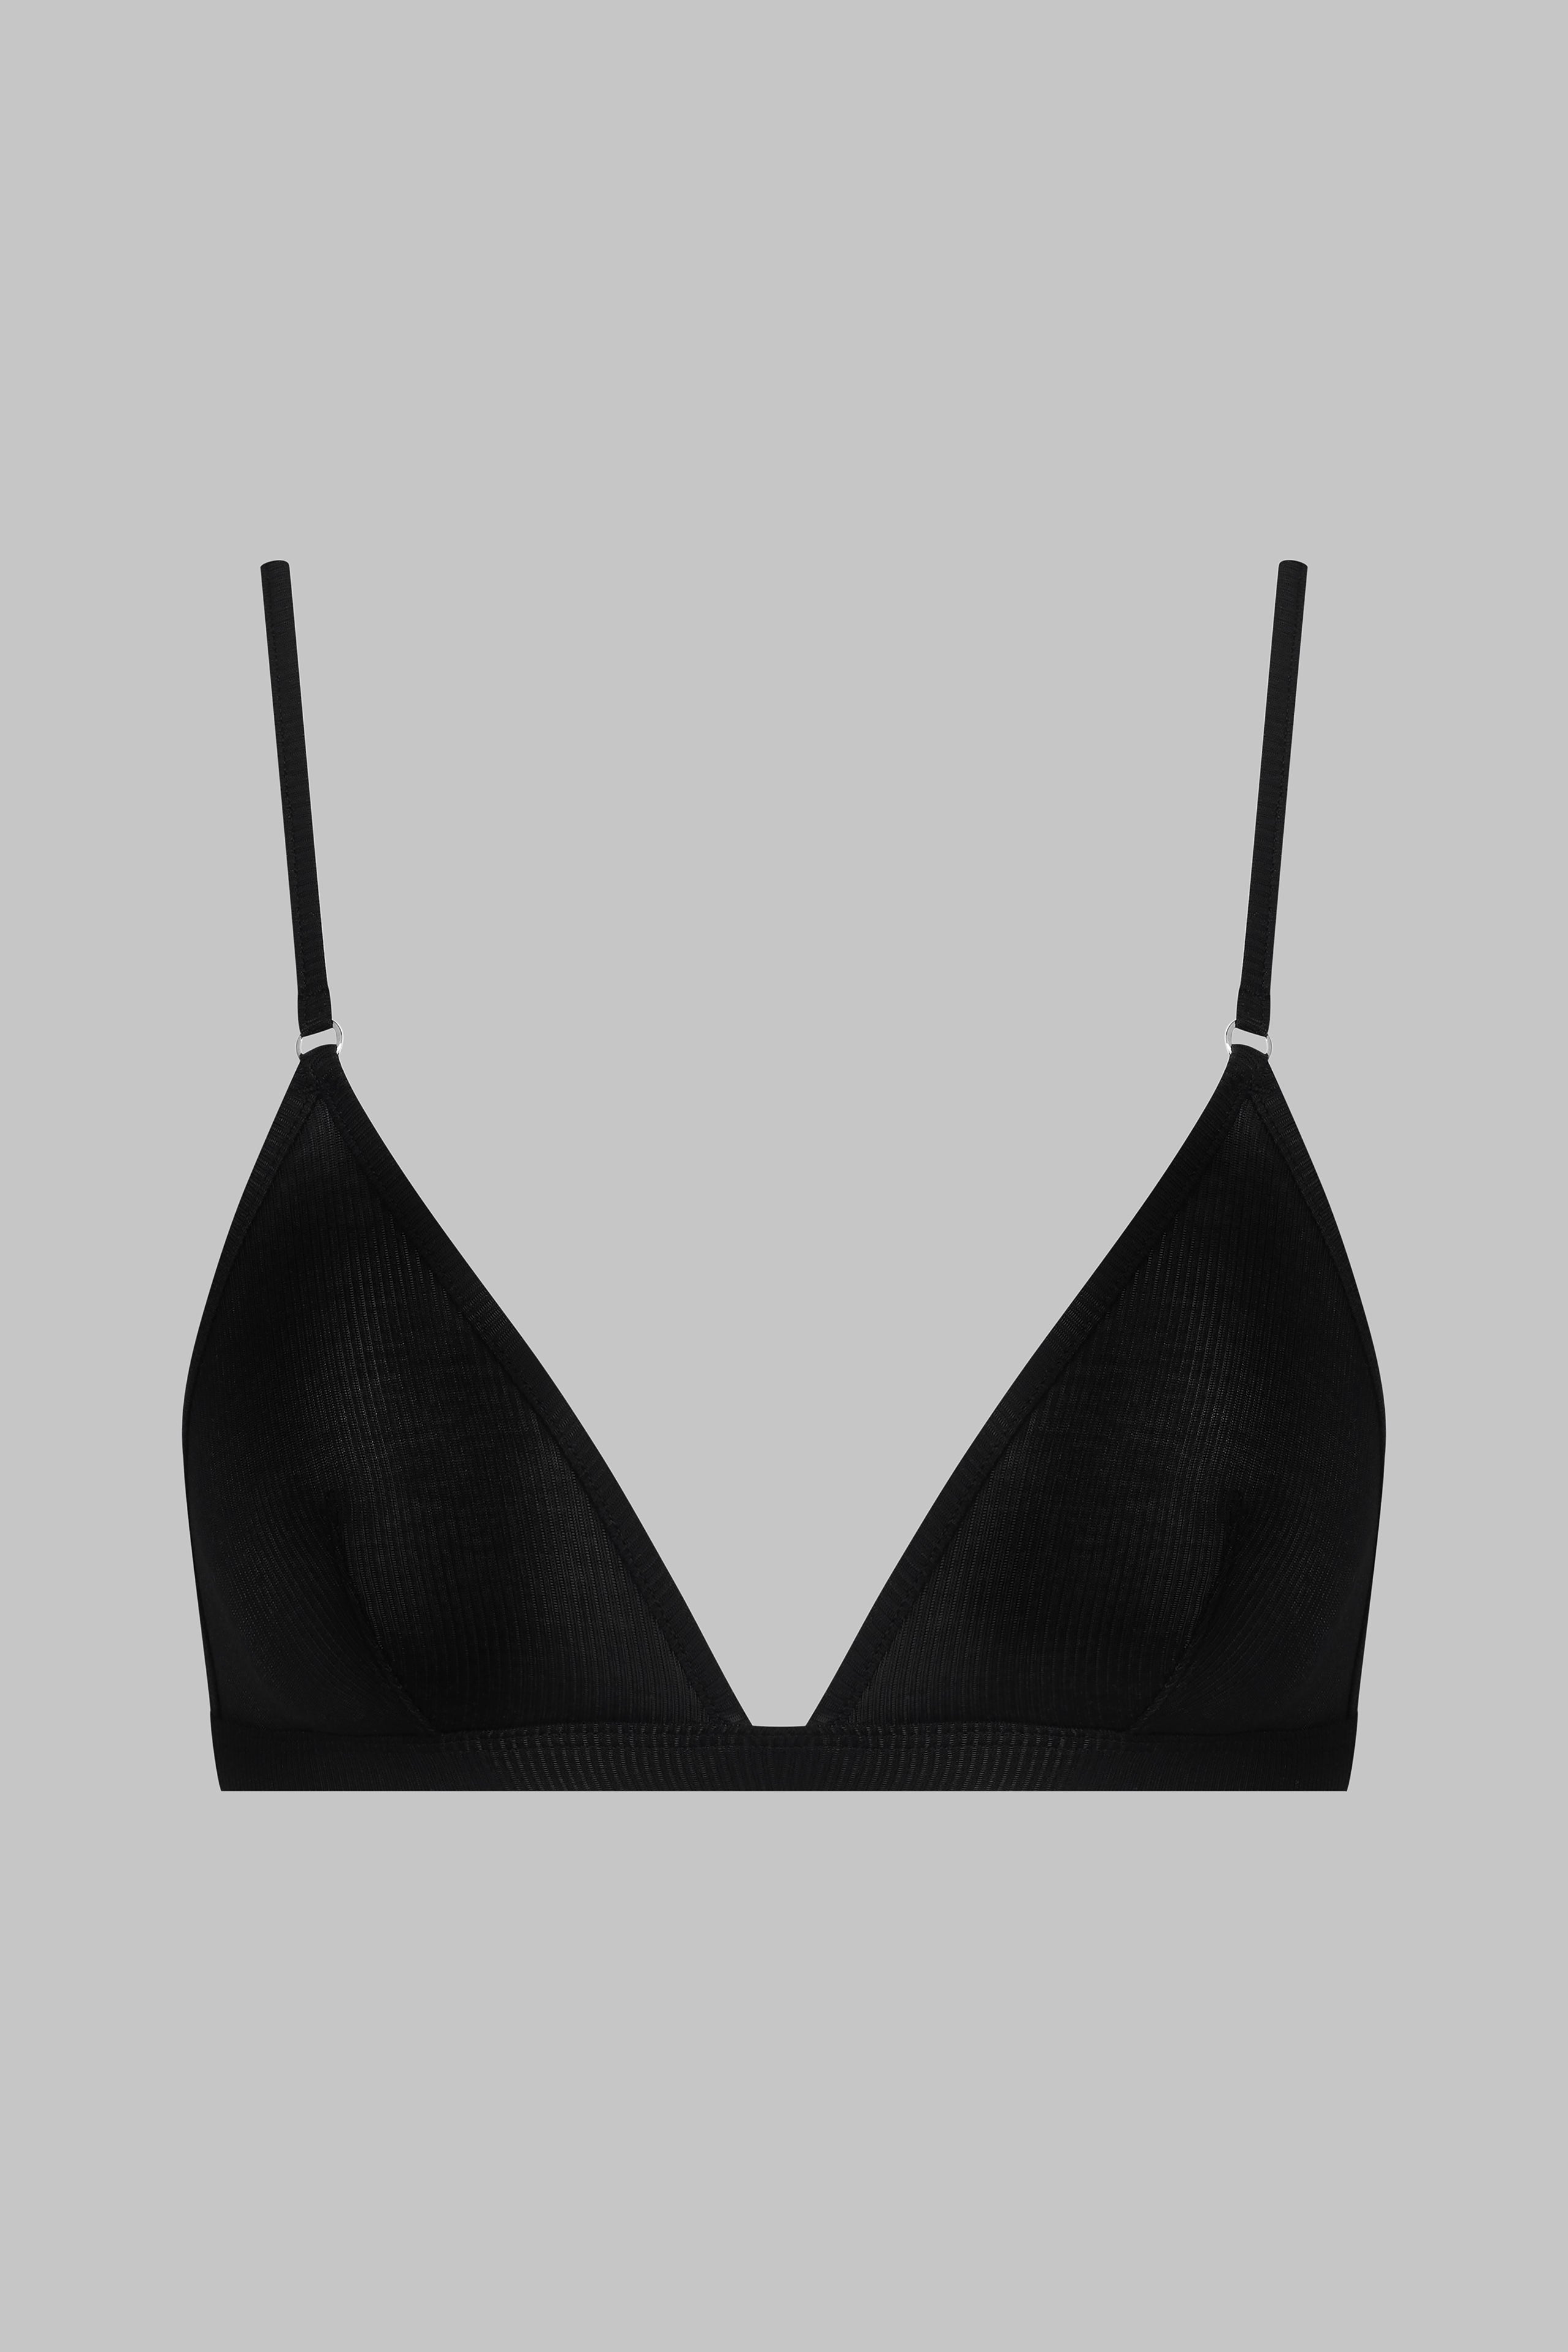 Women's Thread Triangle Bra Wireless Lightly Lined Bralette Top Beauty Back  Out Bras Strapless Bra for Plus (Black, S) at  Women's Clothing store